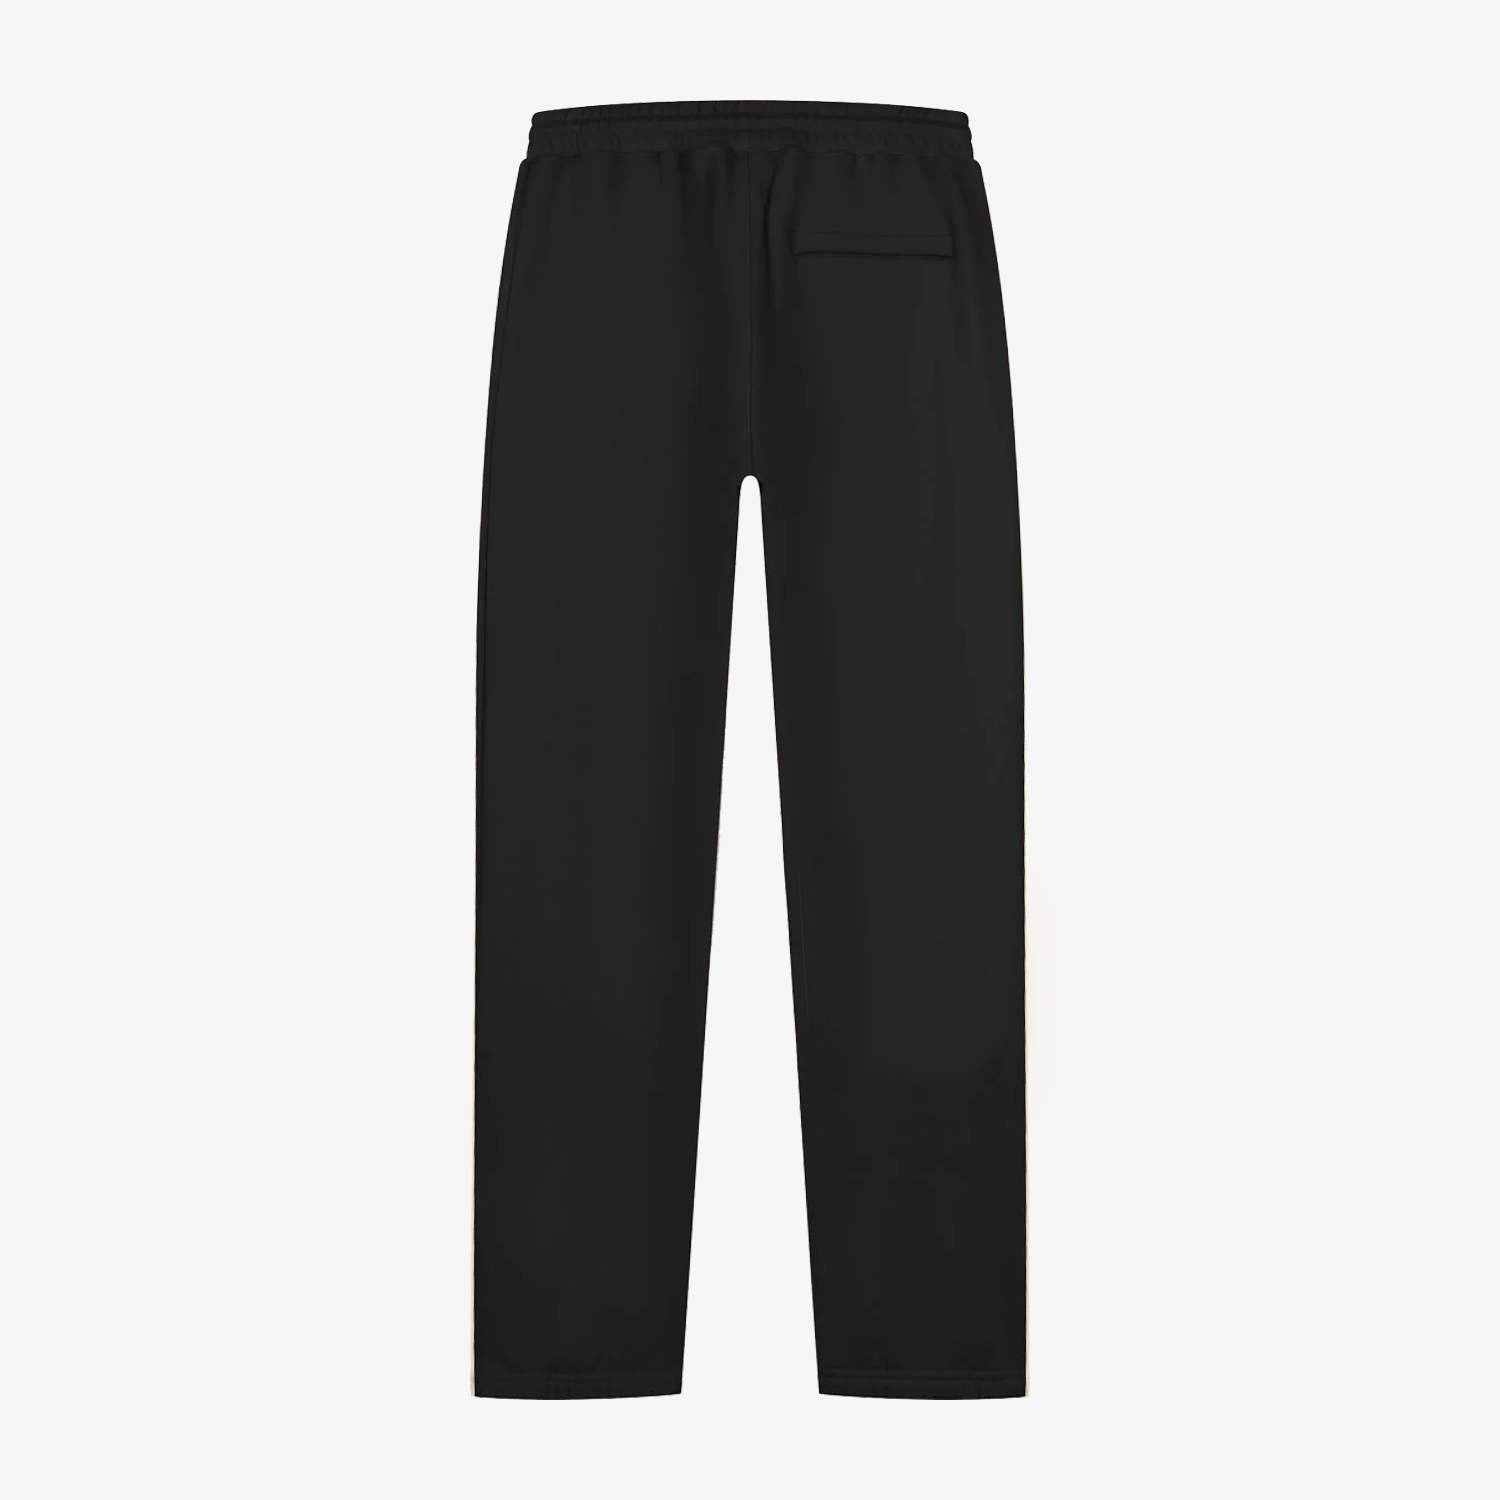 5ivepillars Relaxed Fit Sweatpants - Black